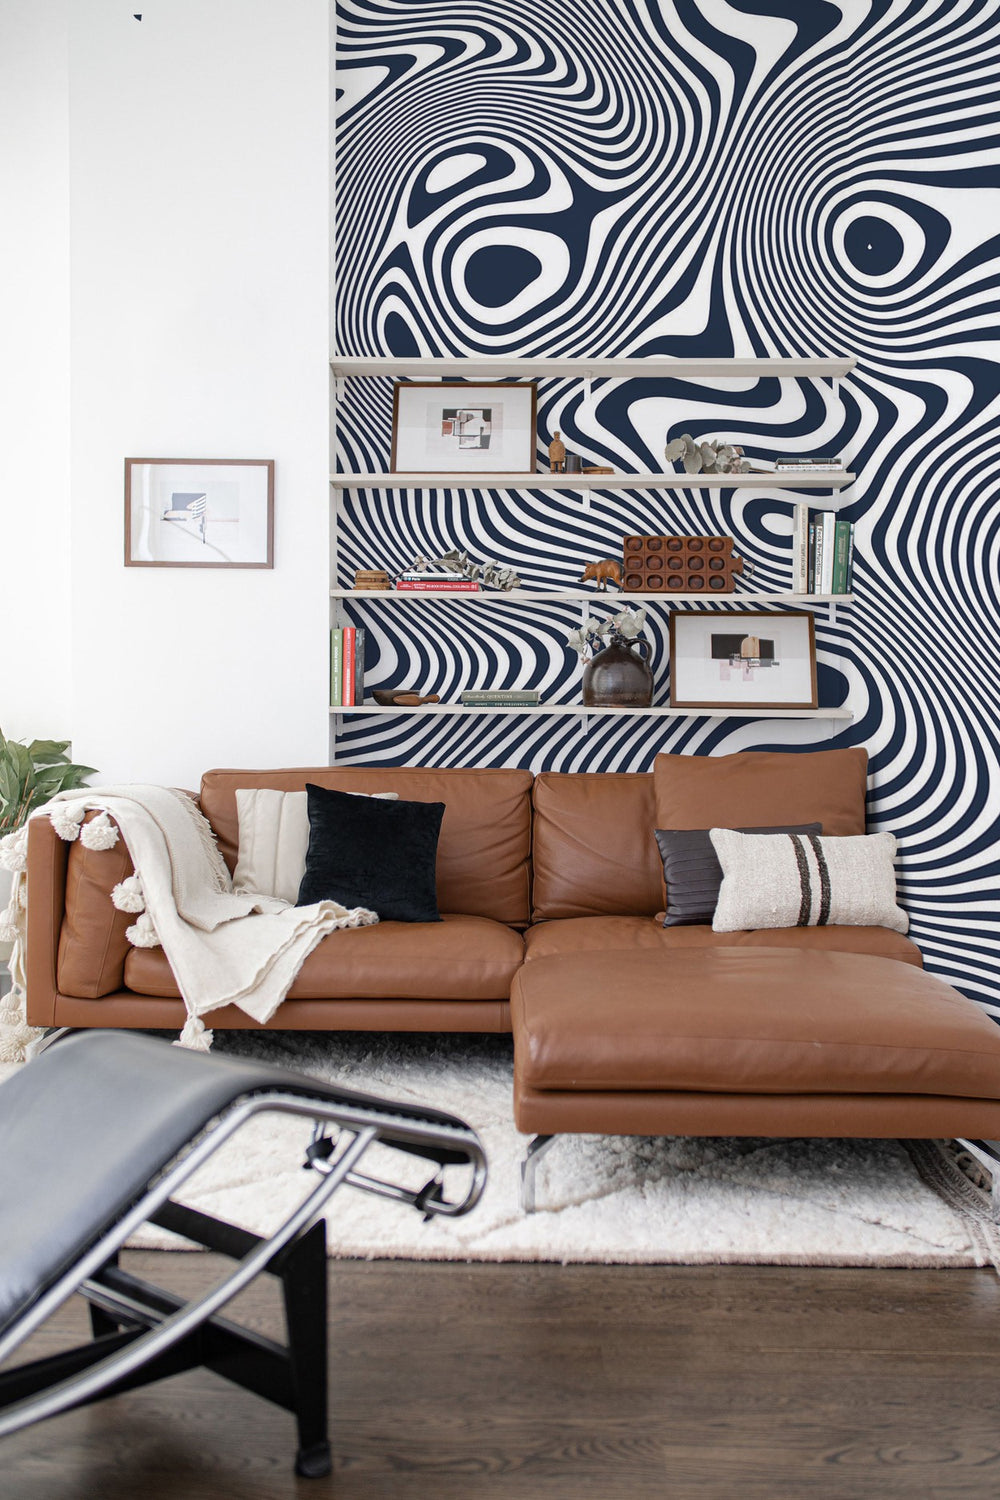 A cozy living room with a black and white abstract wall mural behind a tan leather sofa with decorative cushions and a modern black chair.